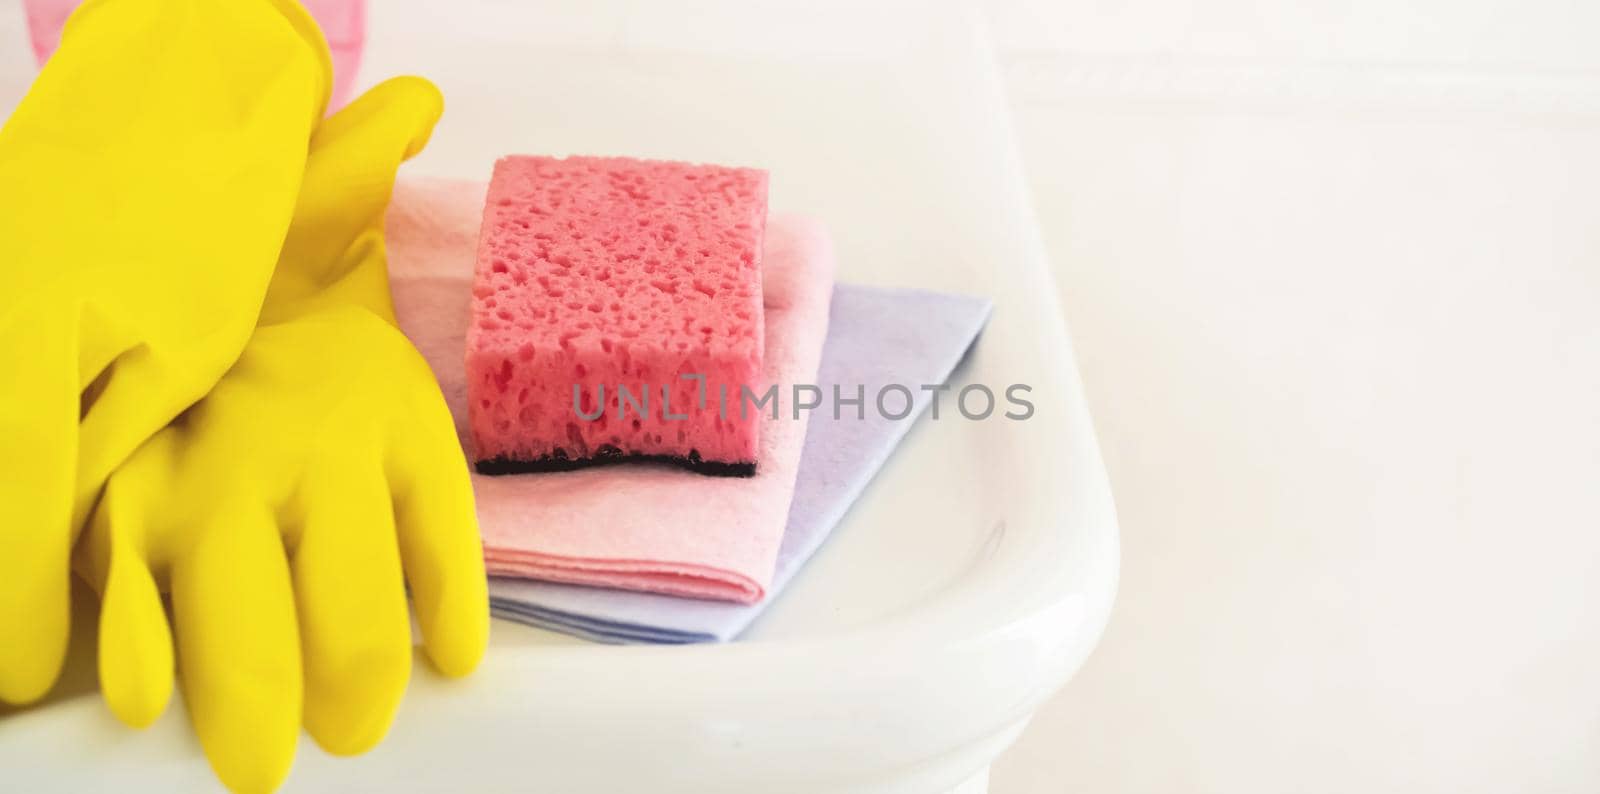 Household cleaning items, such as rubber yellow gloves, several types of rags and sponges, lie on a clean white washstand in the bathroom.